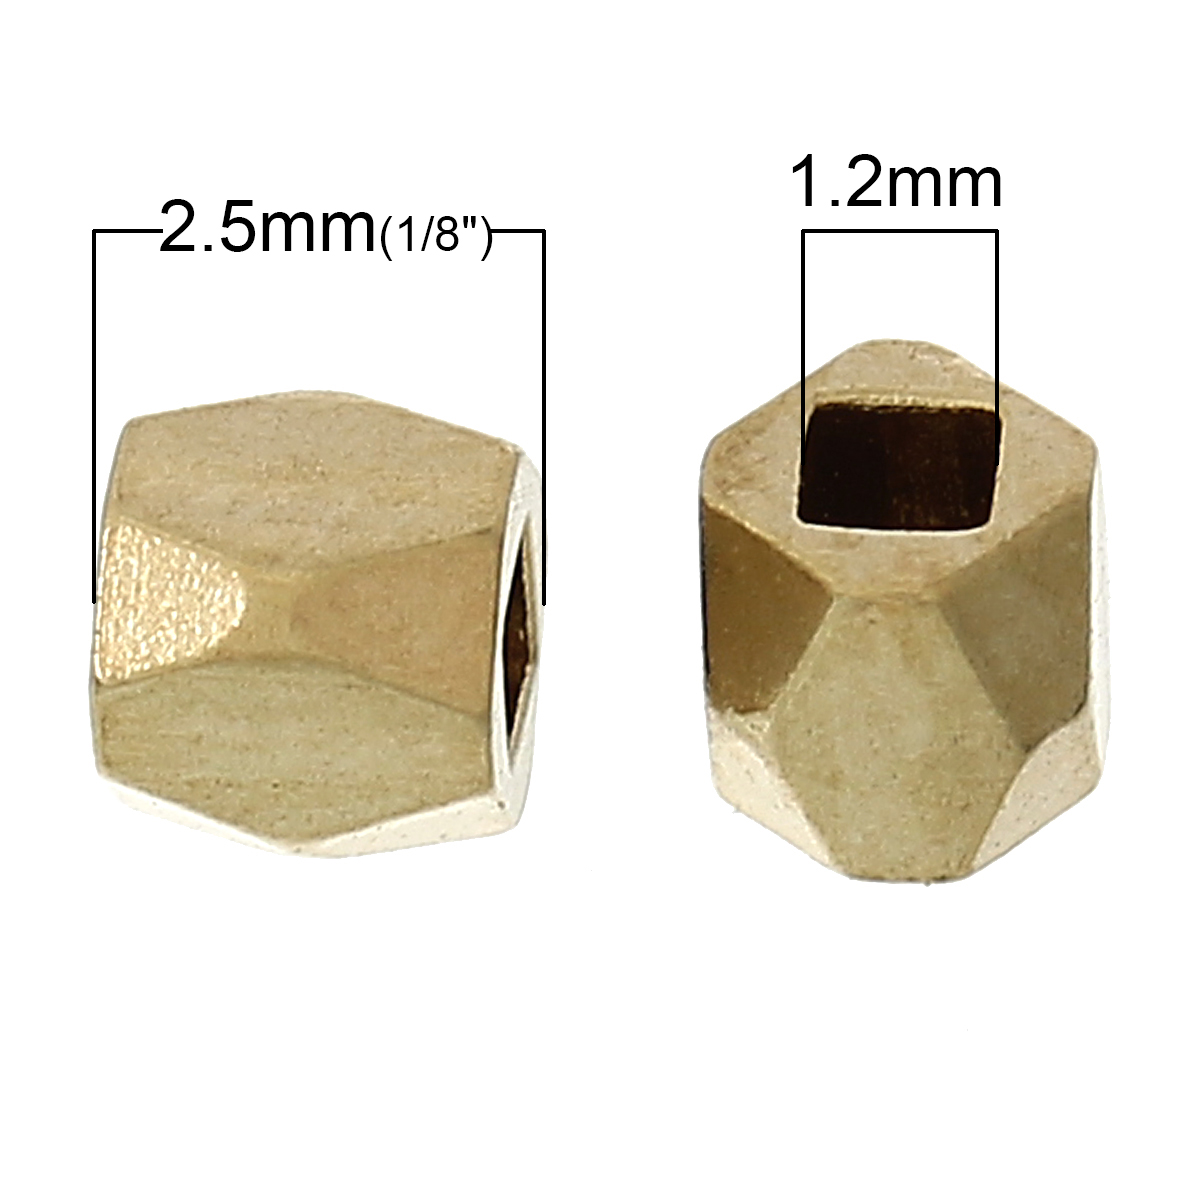 Picture of Copper Spacer Beads Polygon Light Golden Faceted About 2mm x 2mm, Hole: Approx 1.2mm, 200 PCs